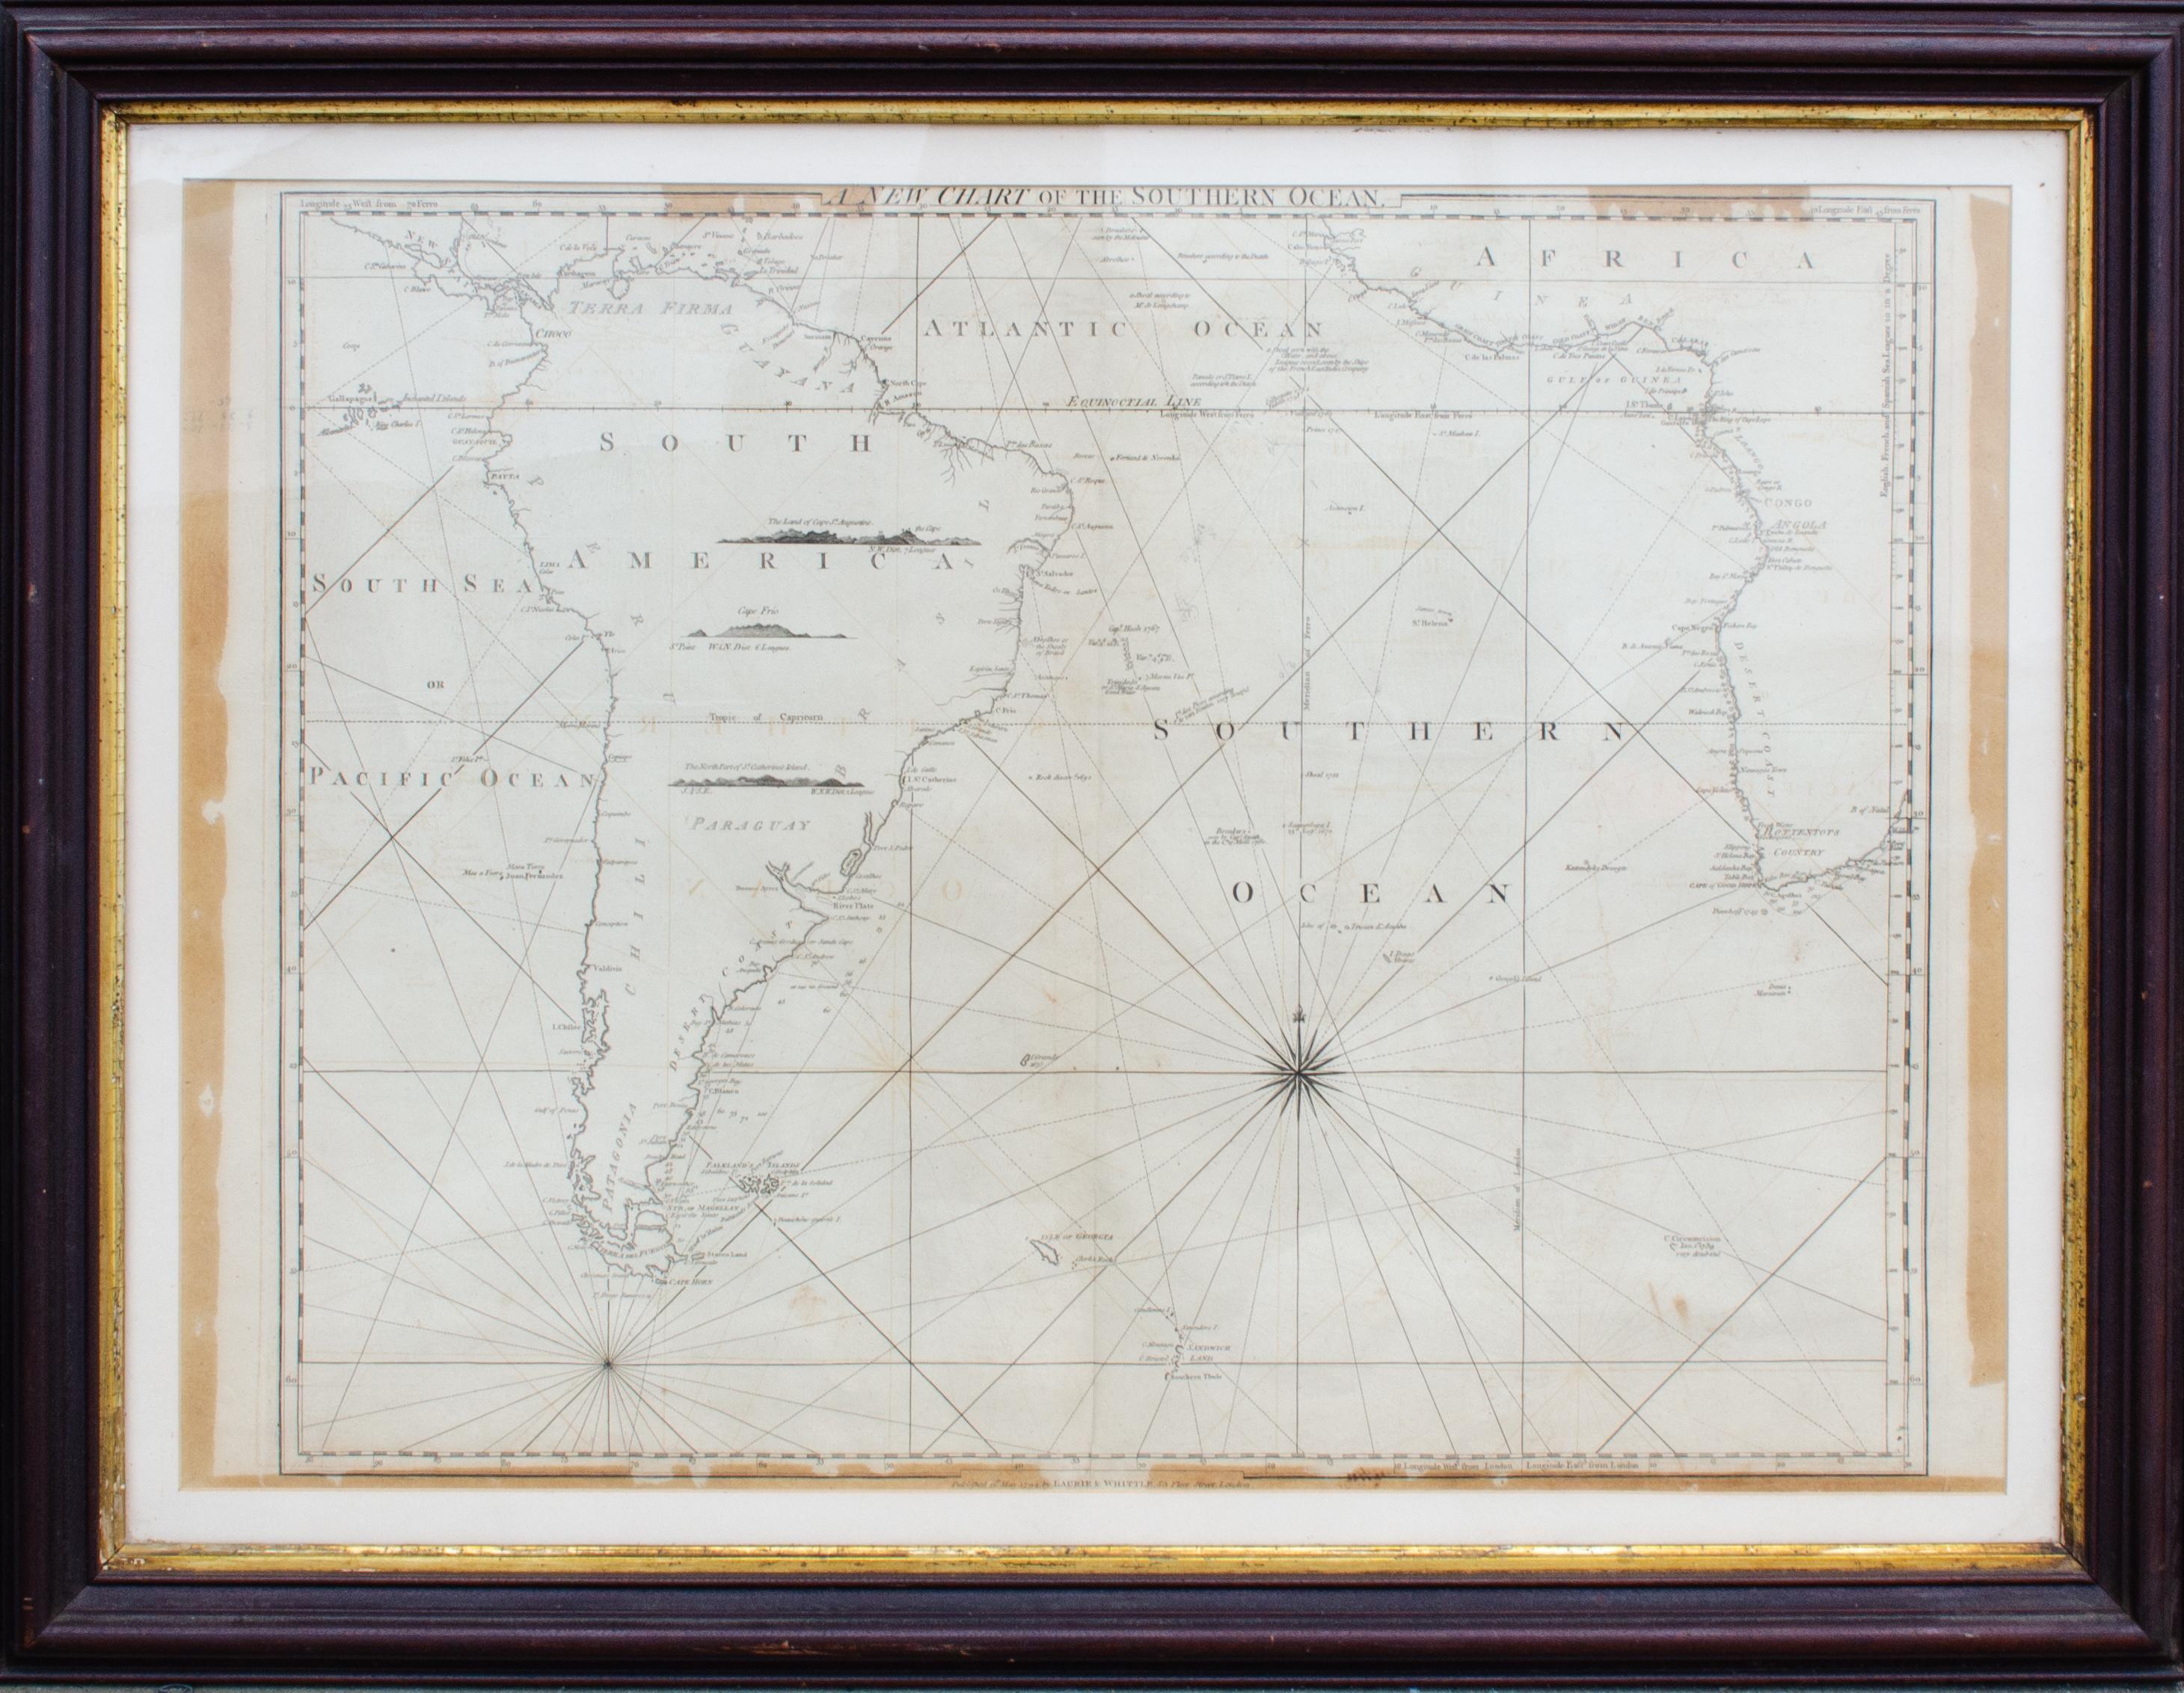 Antique Map of the Southern Oceans, South America and Africa